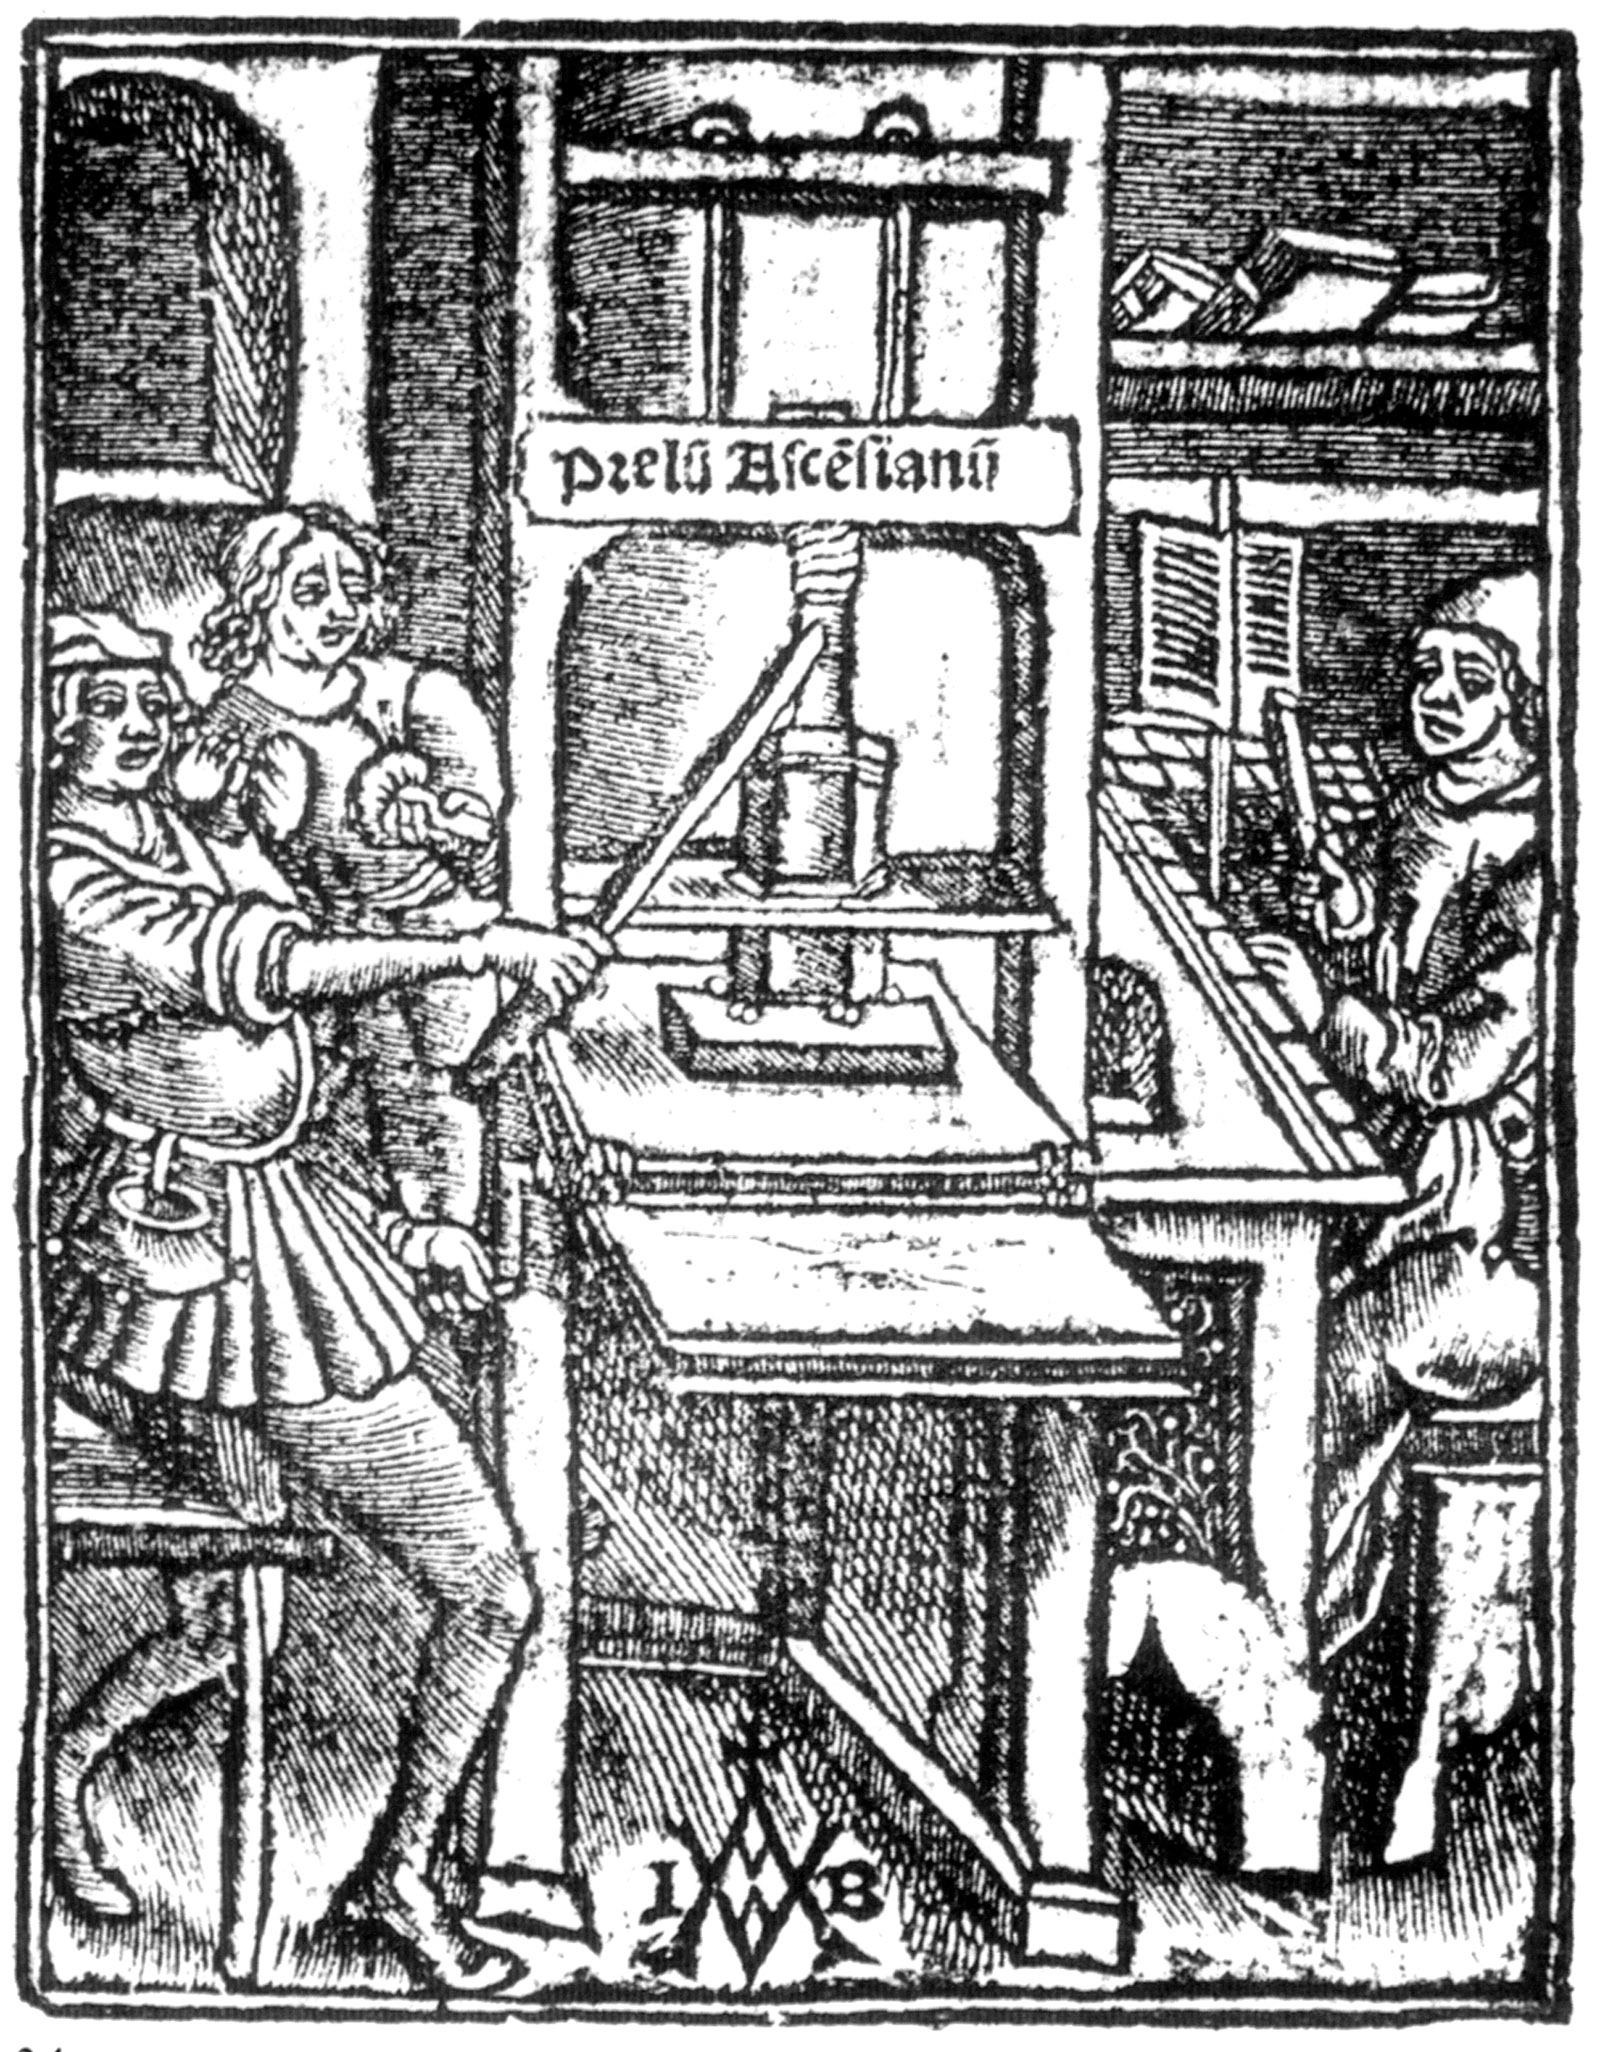 A French printing press; woodcut, 1508